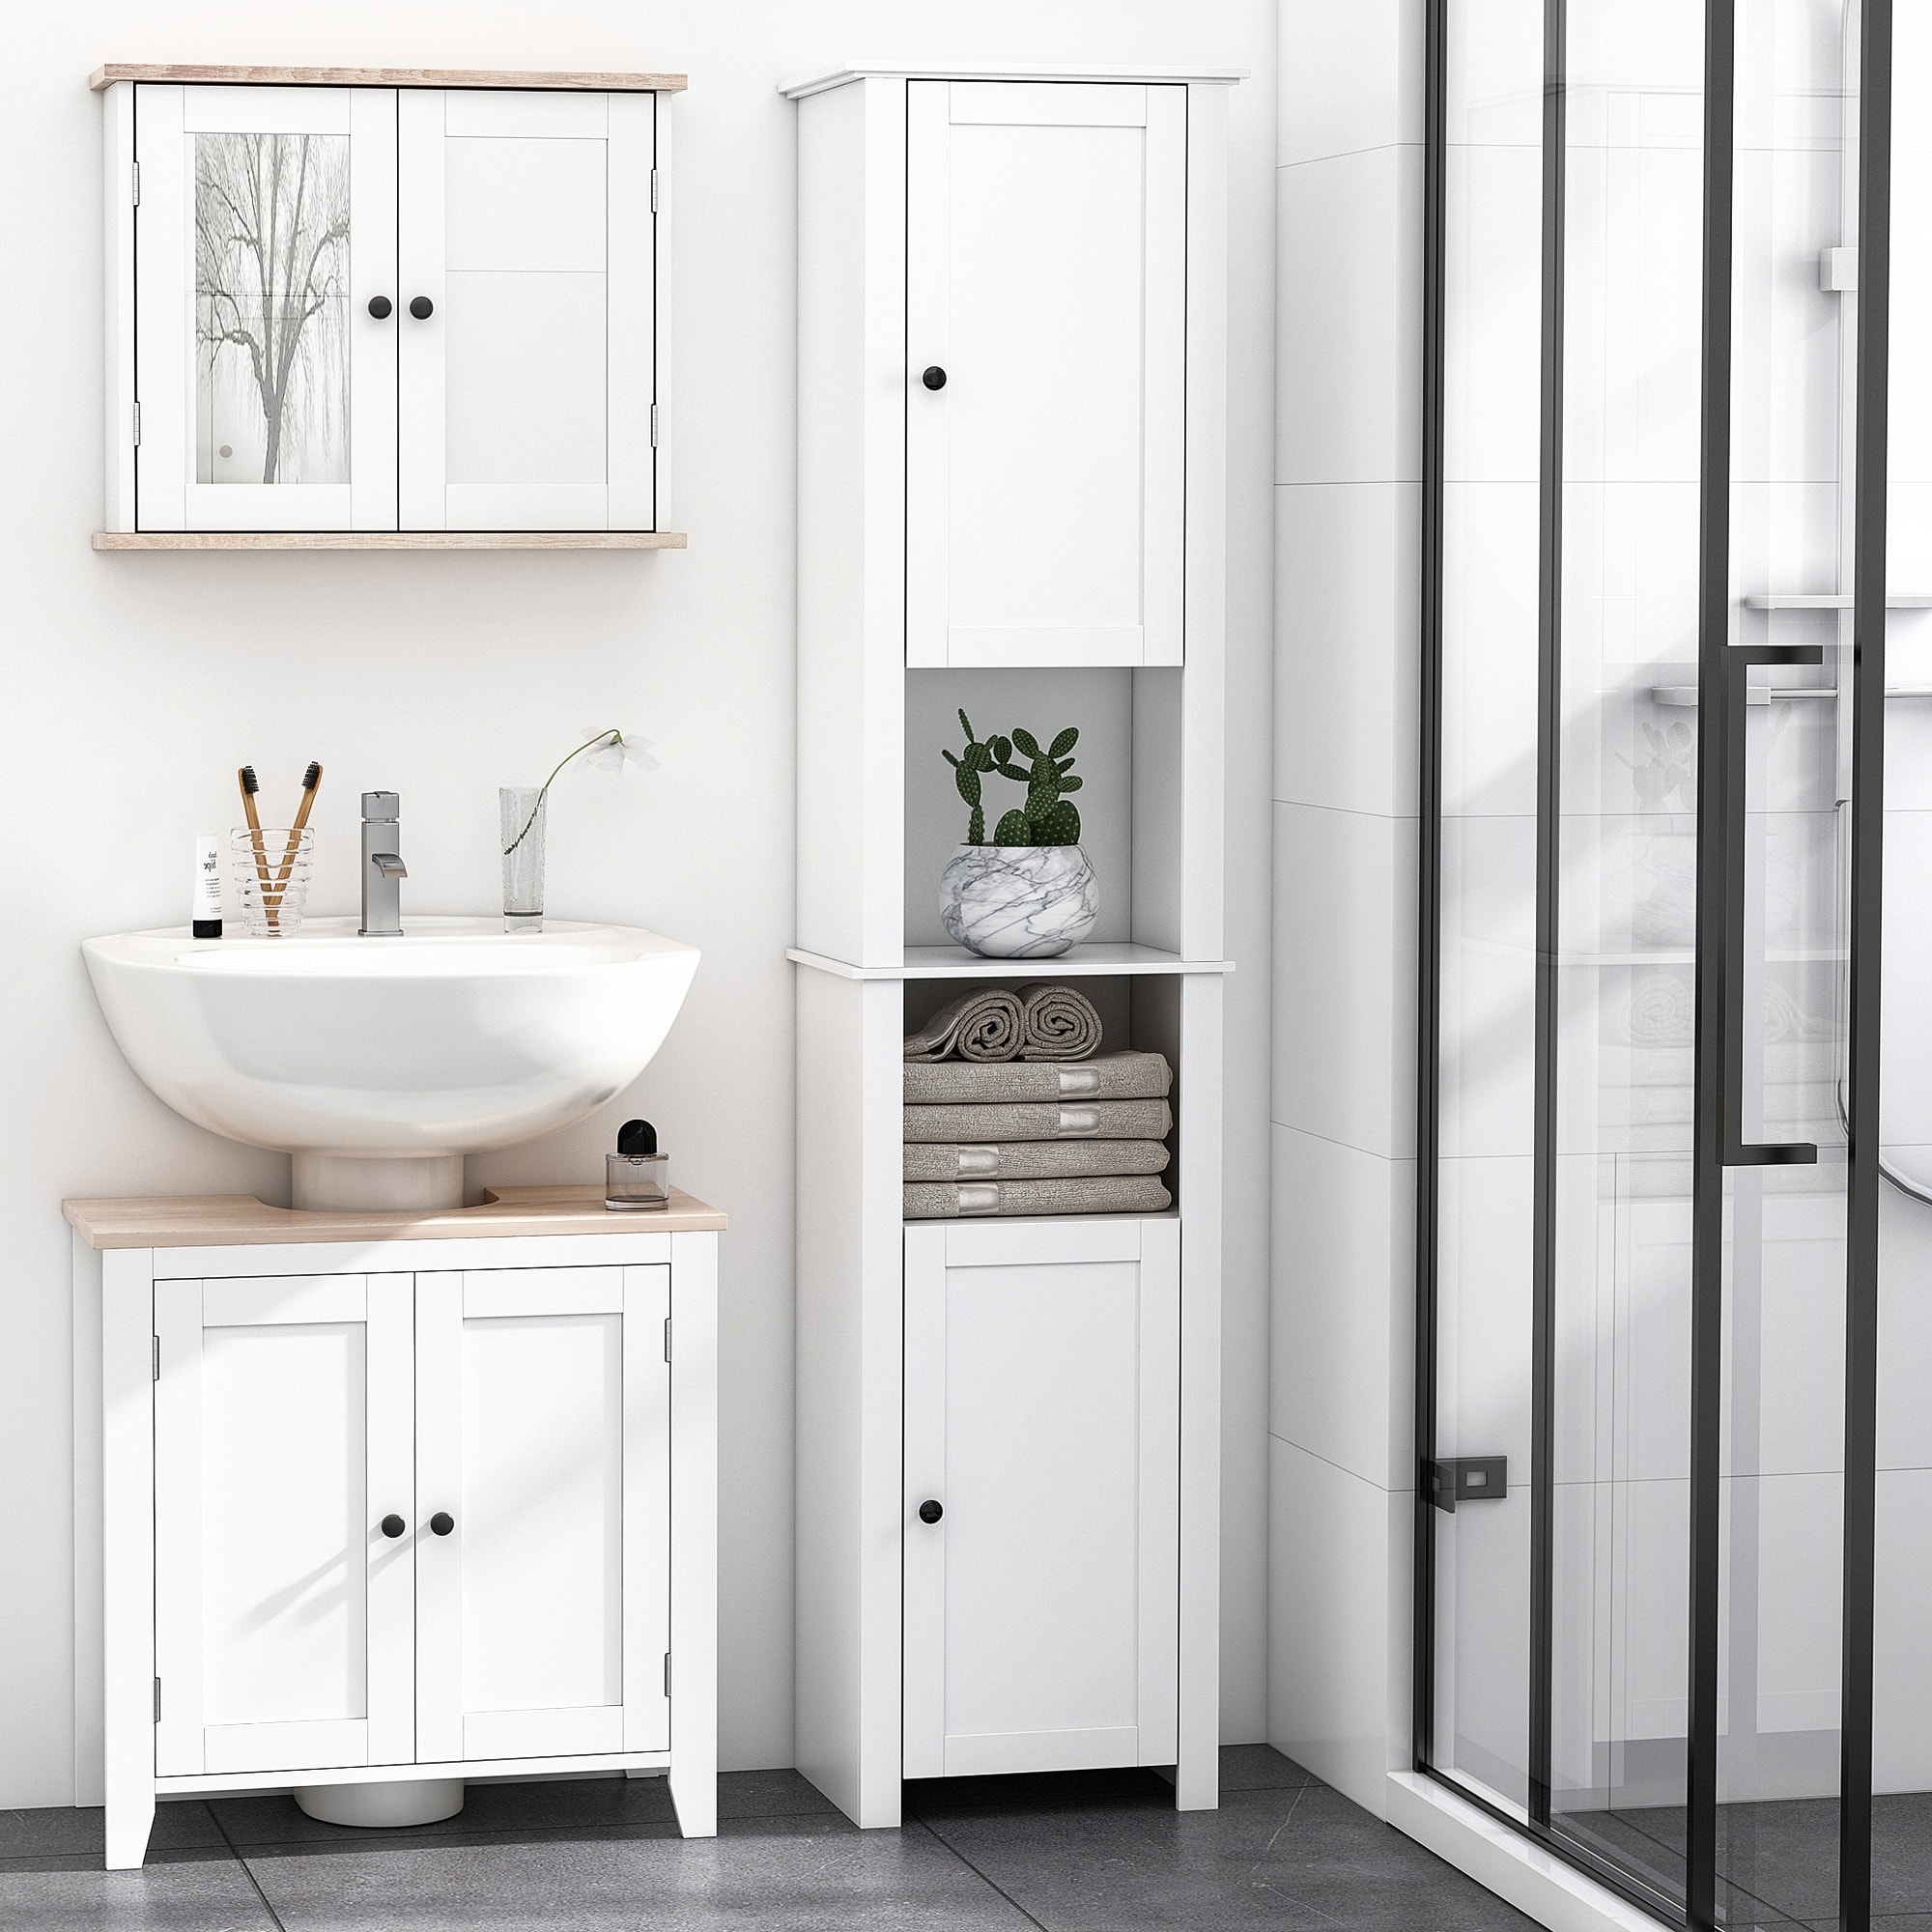 https://ak1.ostkcdn.com/images/products/is/images/direct/b55747b3301d911433185a5a28e7f525916ff976/HOMCOM-Tall-Bathroom-Storage-Cabinet%2C-Freestanding-Linen-Tower-with-2-Tier-Shelf-and-2-Cupboards%2C-White.jpg